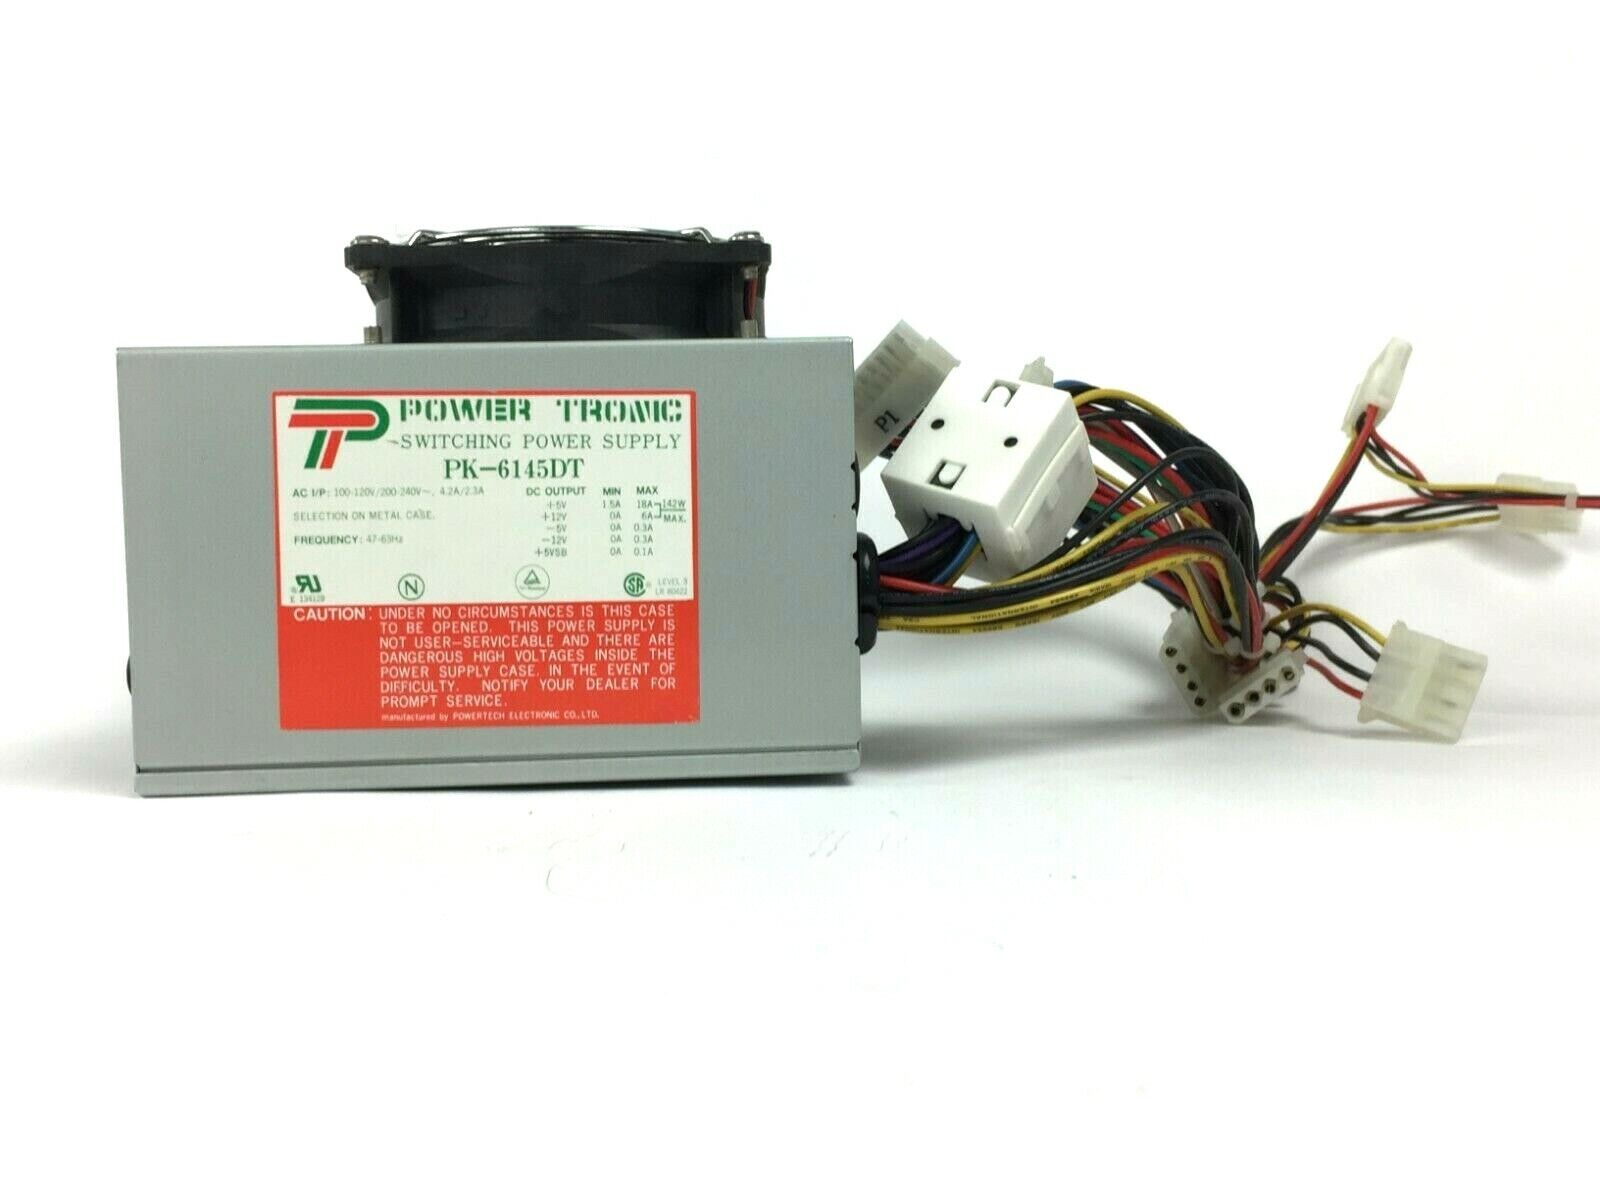 Power Tronic PK-6145DT 145W Switching Power Supply Gateway Tower